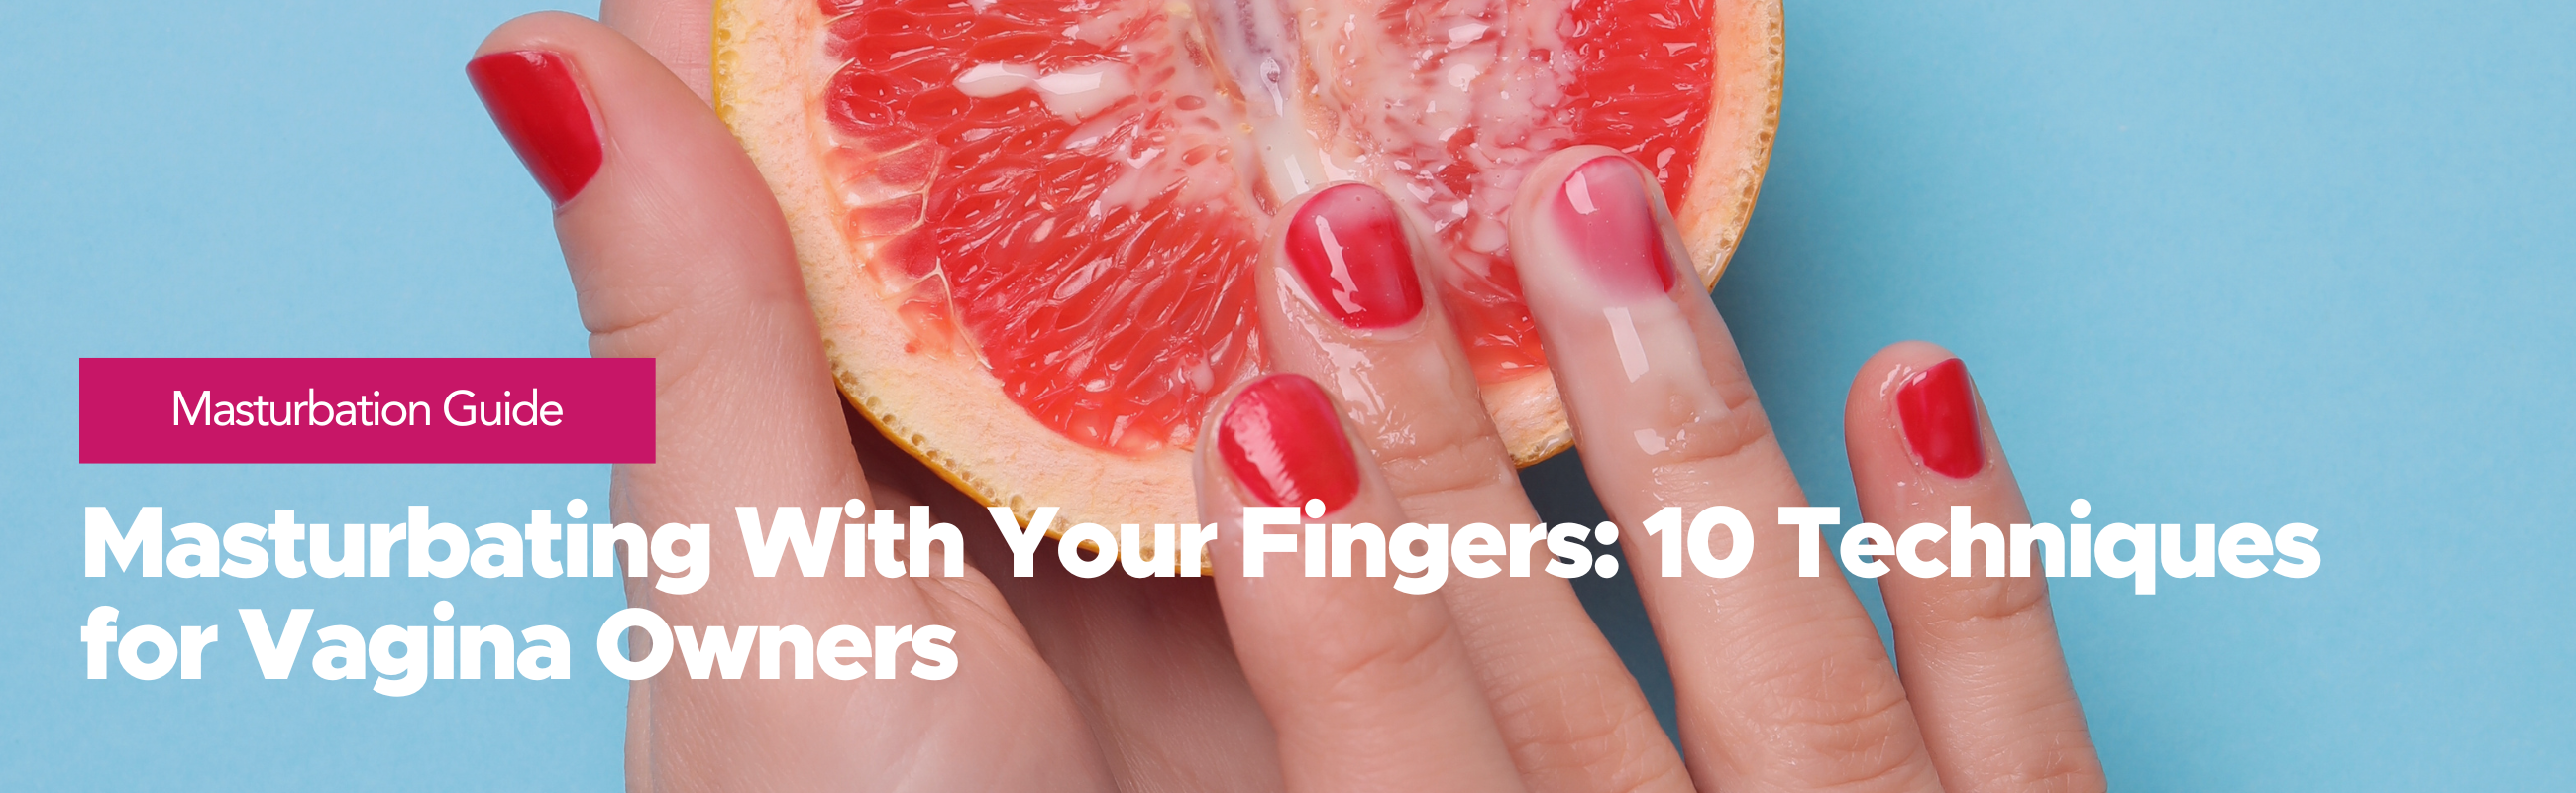 Masturbating With Your Fingers: 10 Techniques for Vagina Owners